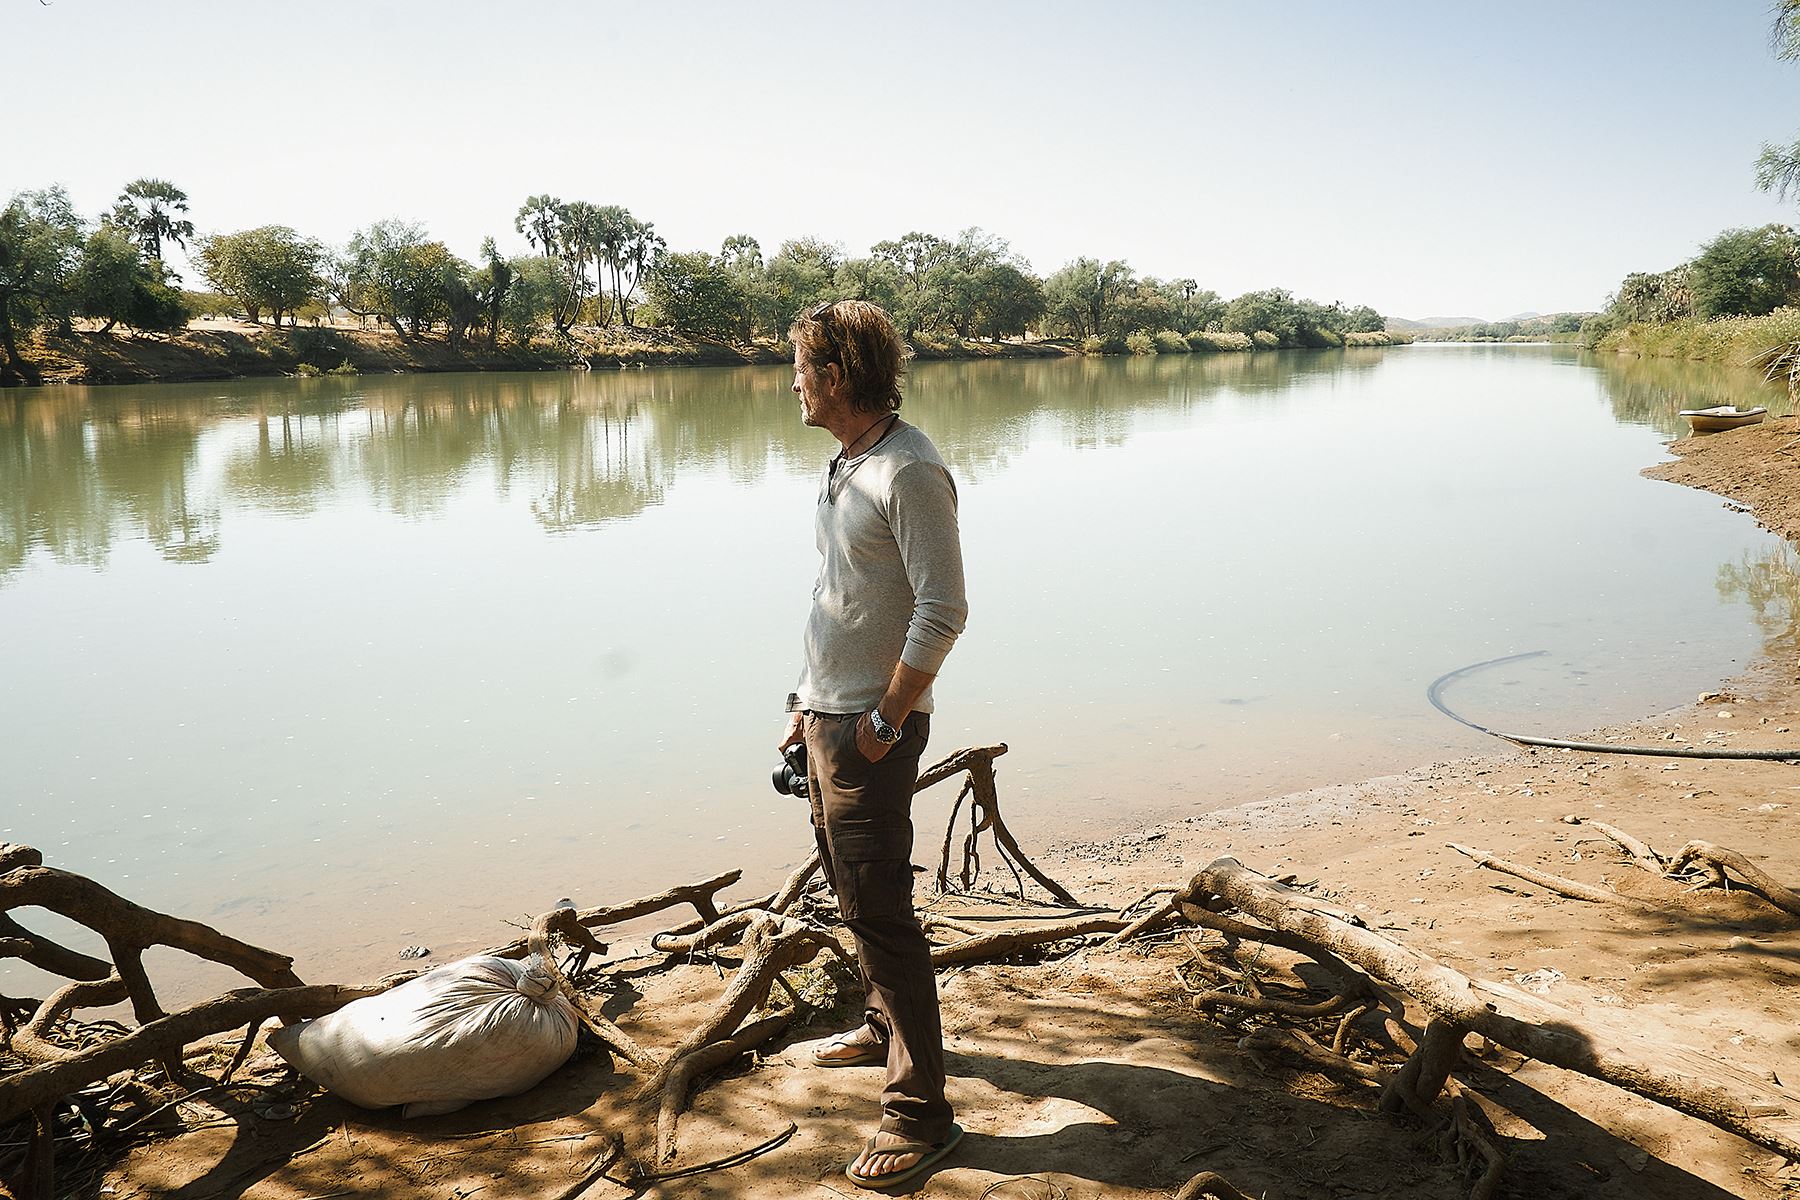 Christopher Rimmer, Confluence, Kunene River, Southern Africa, Photography, Photographer